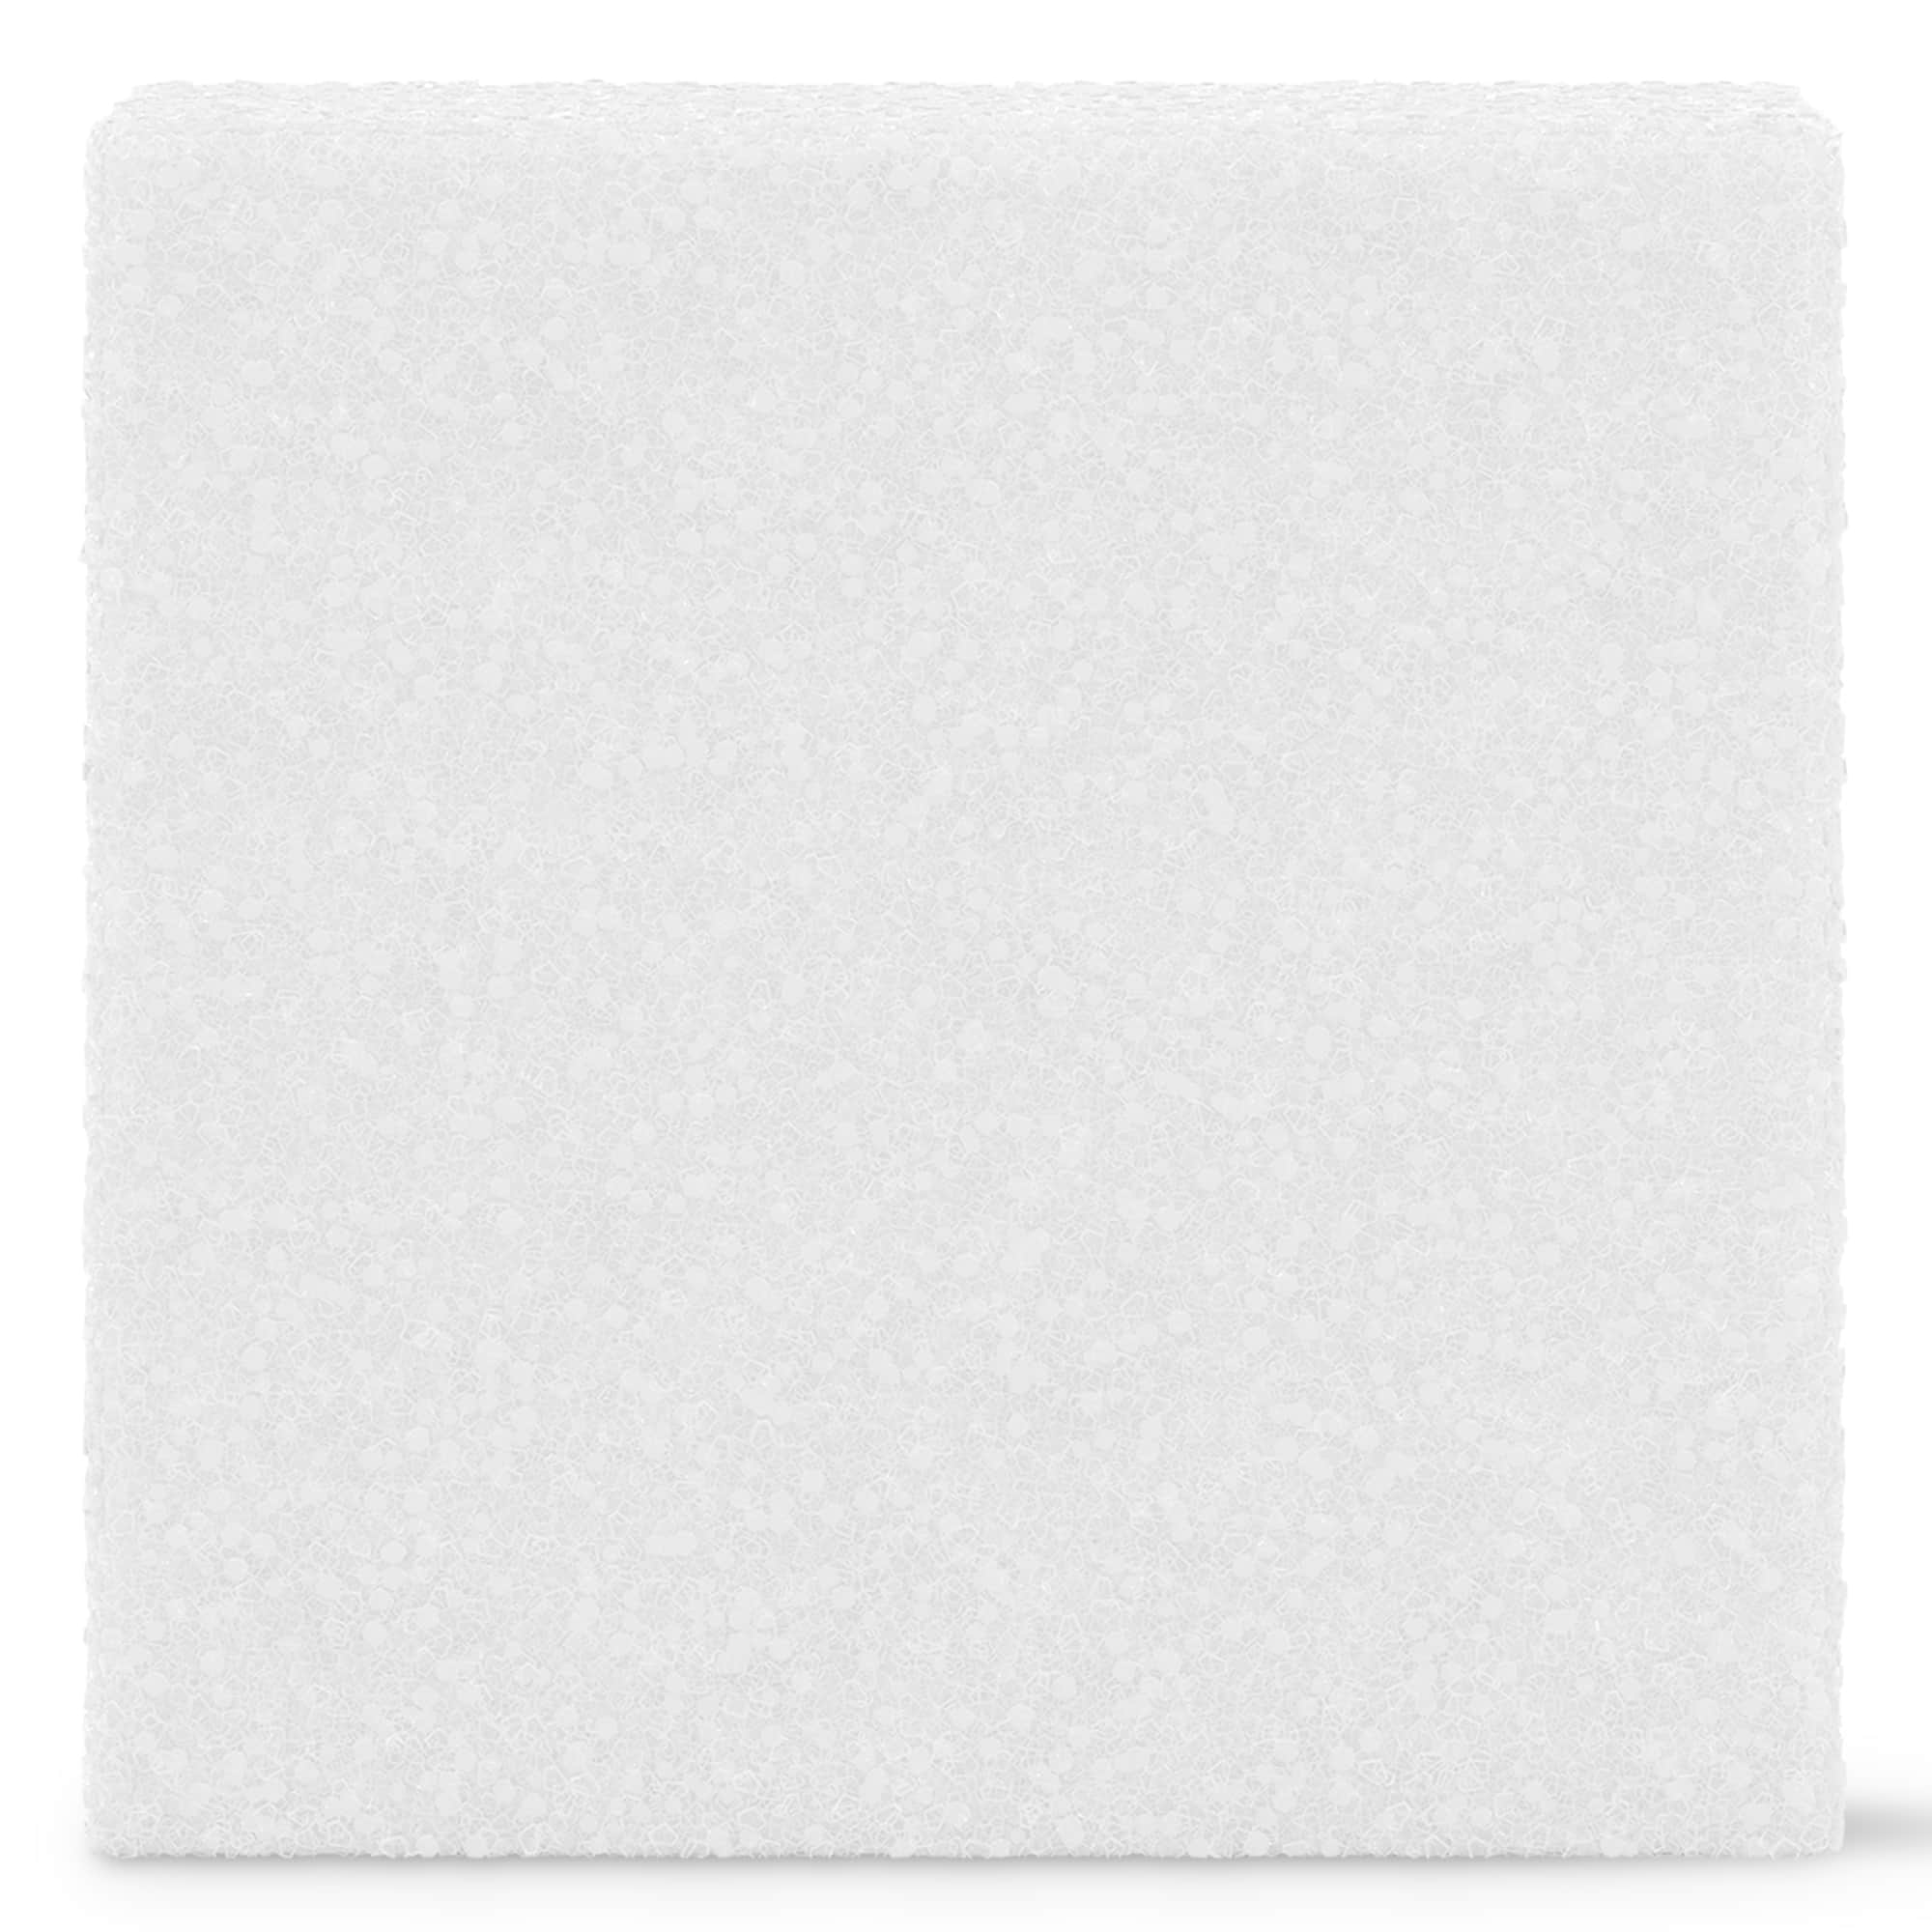 Floracraft Craftfom Ball, 3 Inches, White, Pack Of 12 : Target